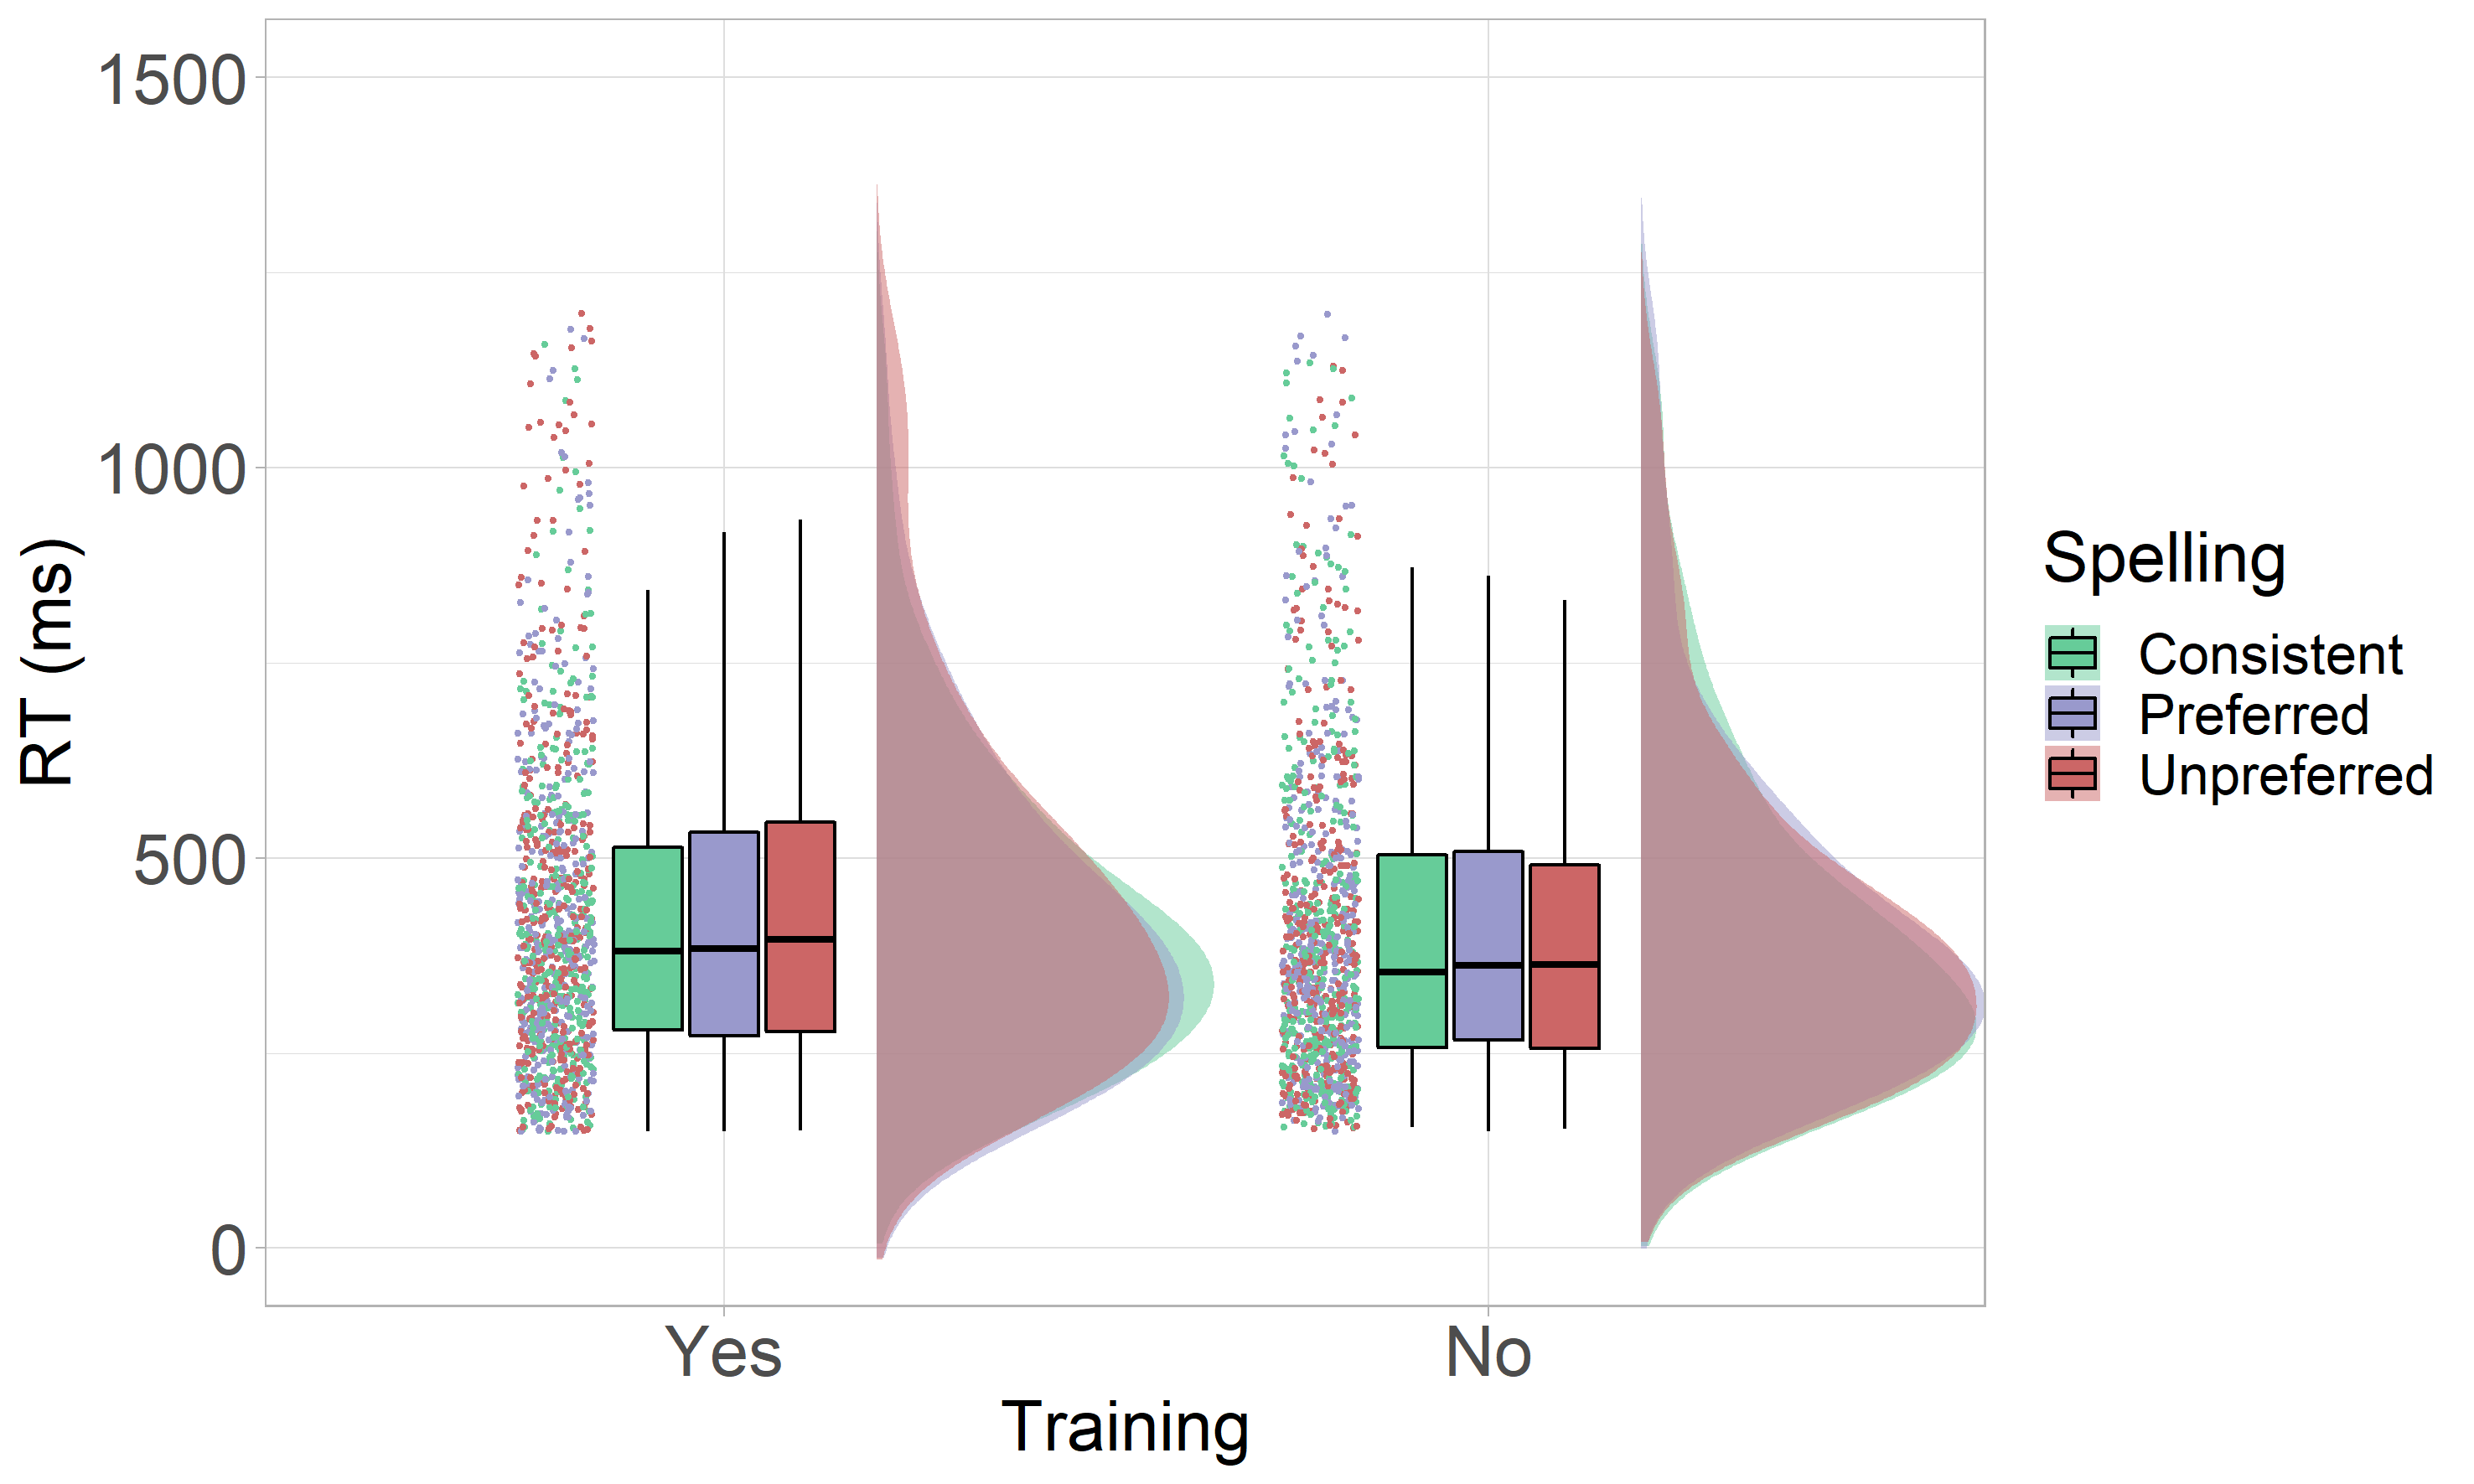 Distribution of Reaction Times From the Experiment 1. Raincloud plots showing the distribustions of RTs for both trained and untrained consistent, preferred and unpreferred spellings.